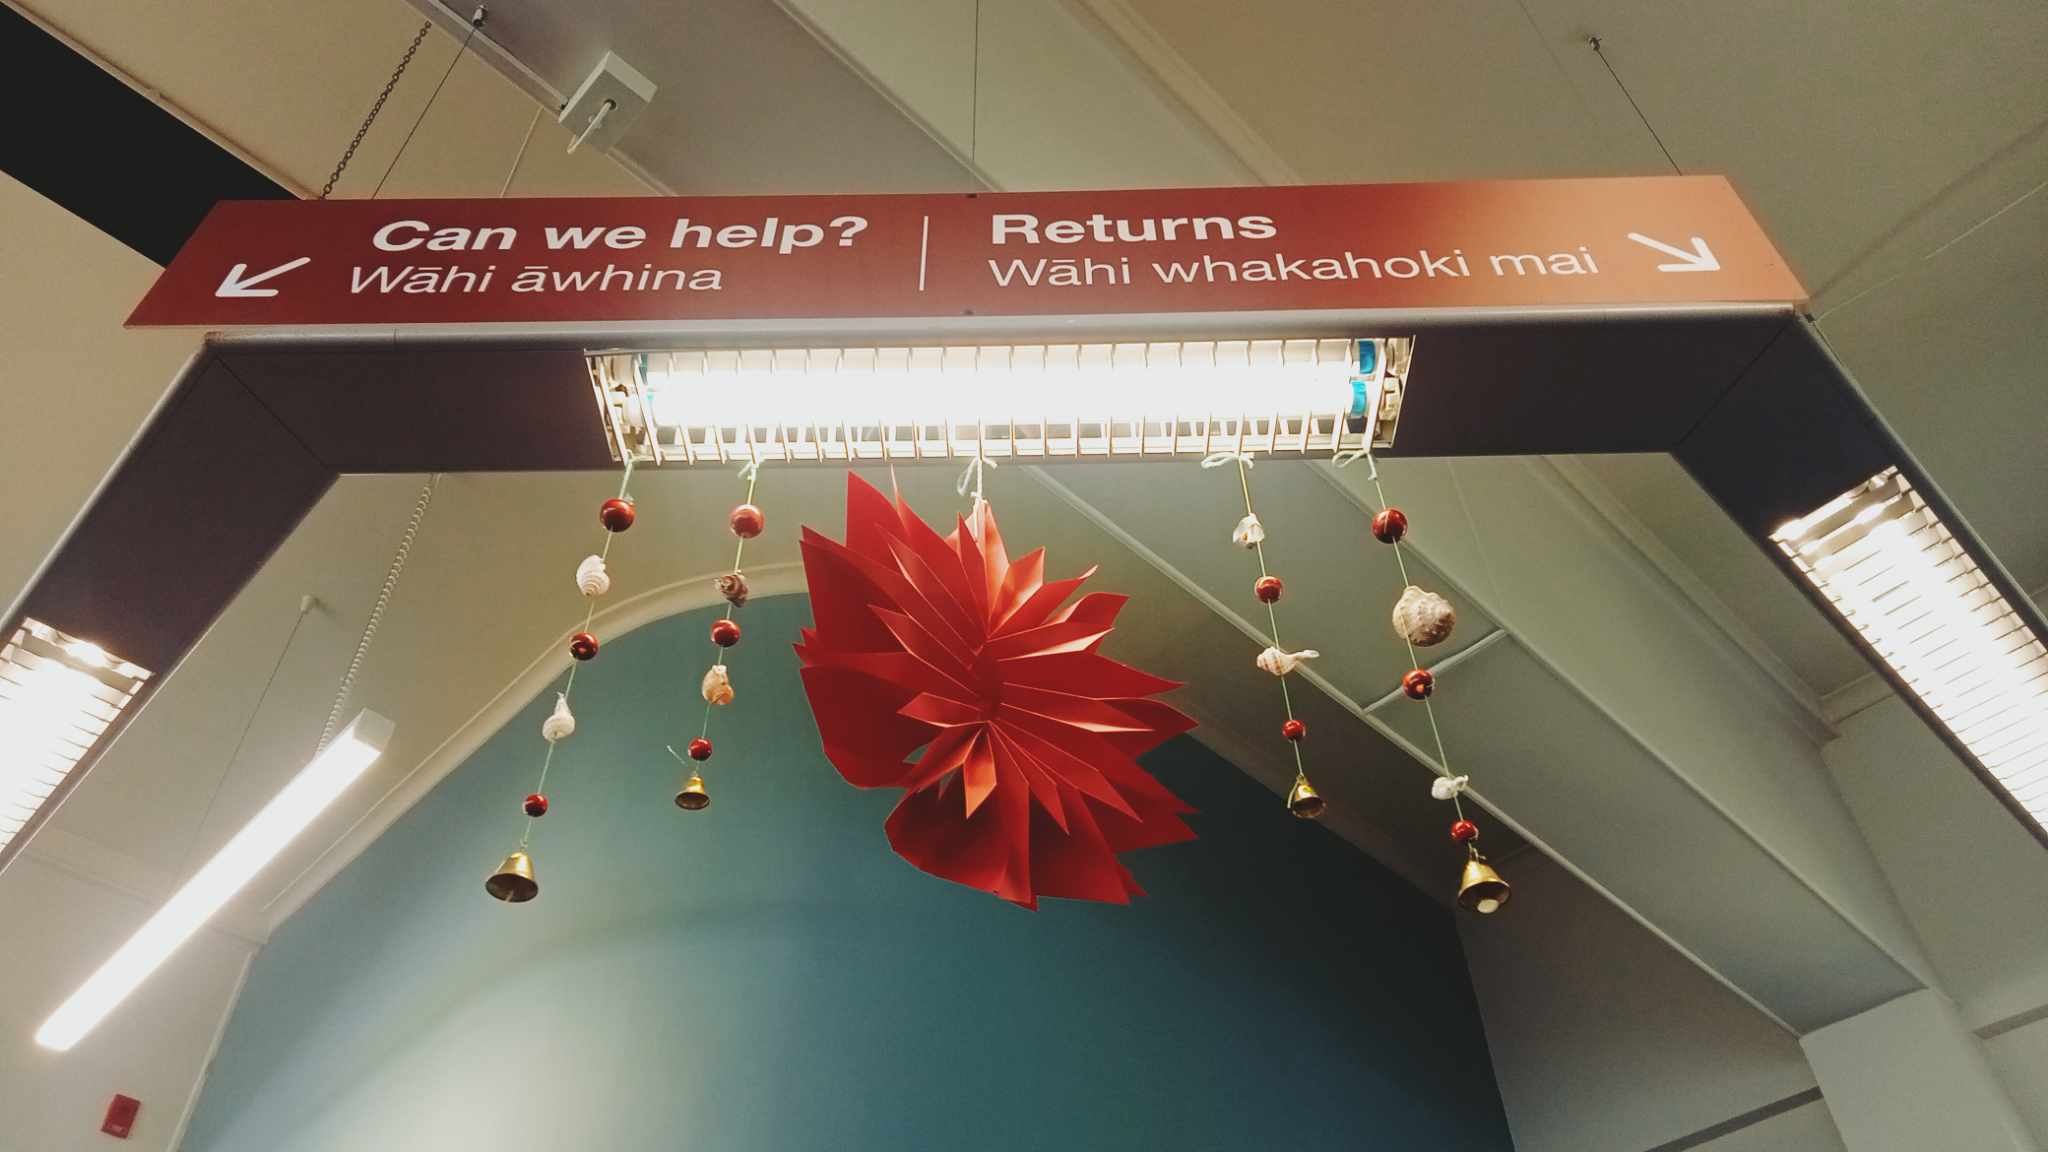 A large red paper flower and strings of red beads and white shells hanging from a red library sign with 'Can we help" written on it.